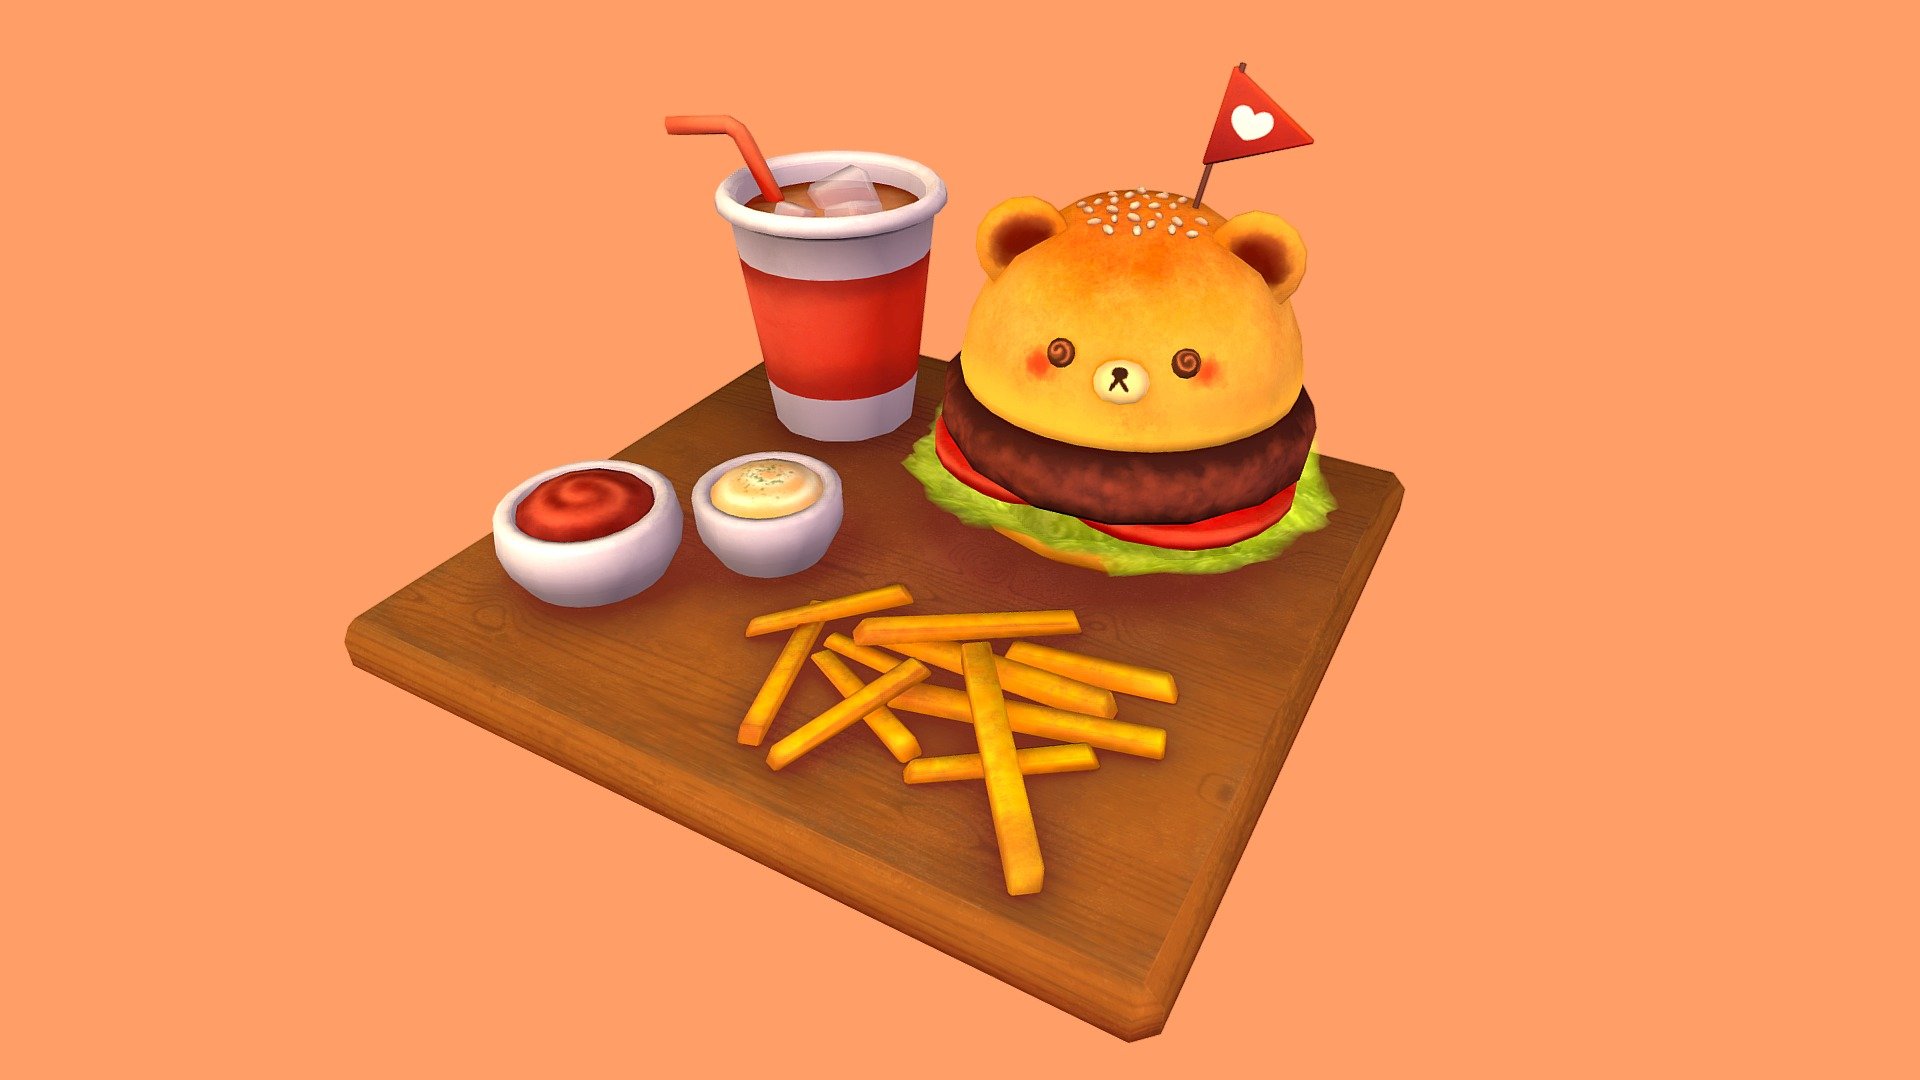 Spent some of my free time this weekend creating this! Who wouldn't love a Bear Burger Menu? ⭐ - Bear Burger Menu! 🐻🍔🍟 - 3D model by Marina (@3dleaf) 3d model